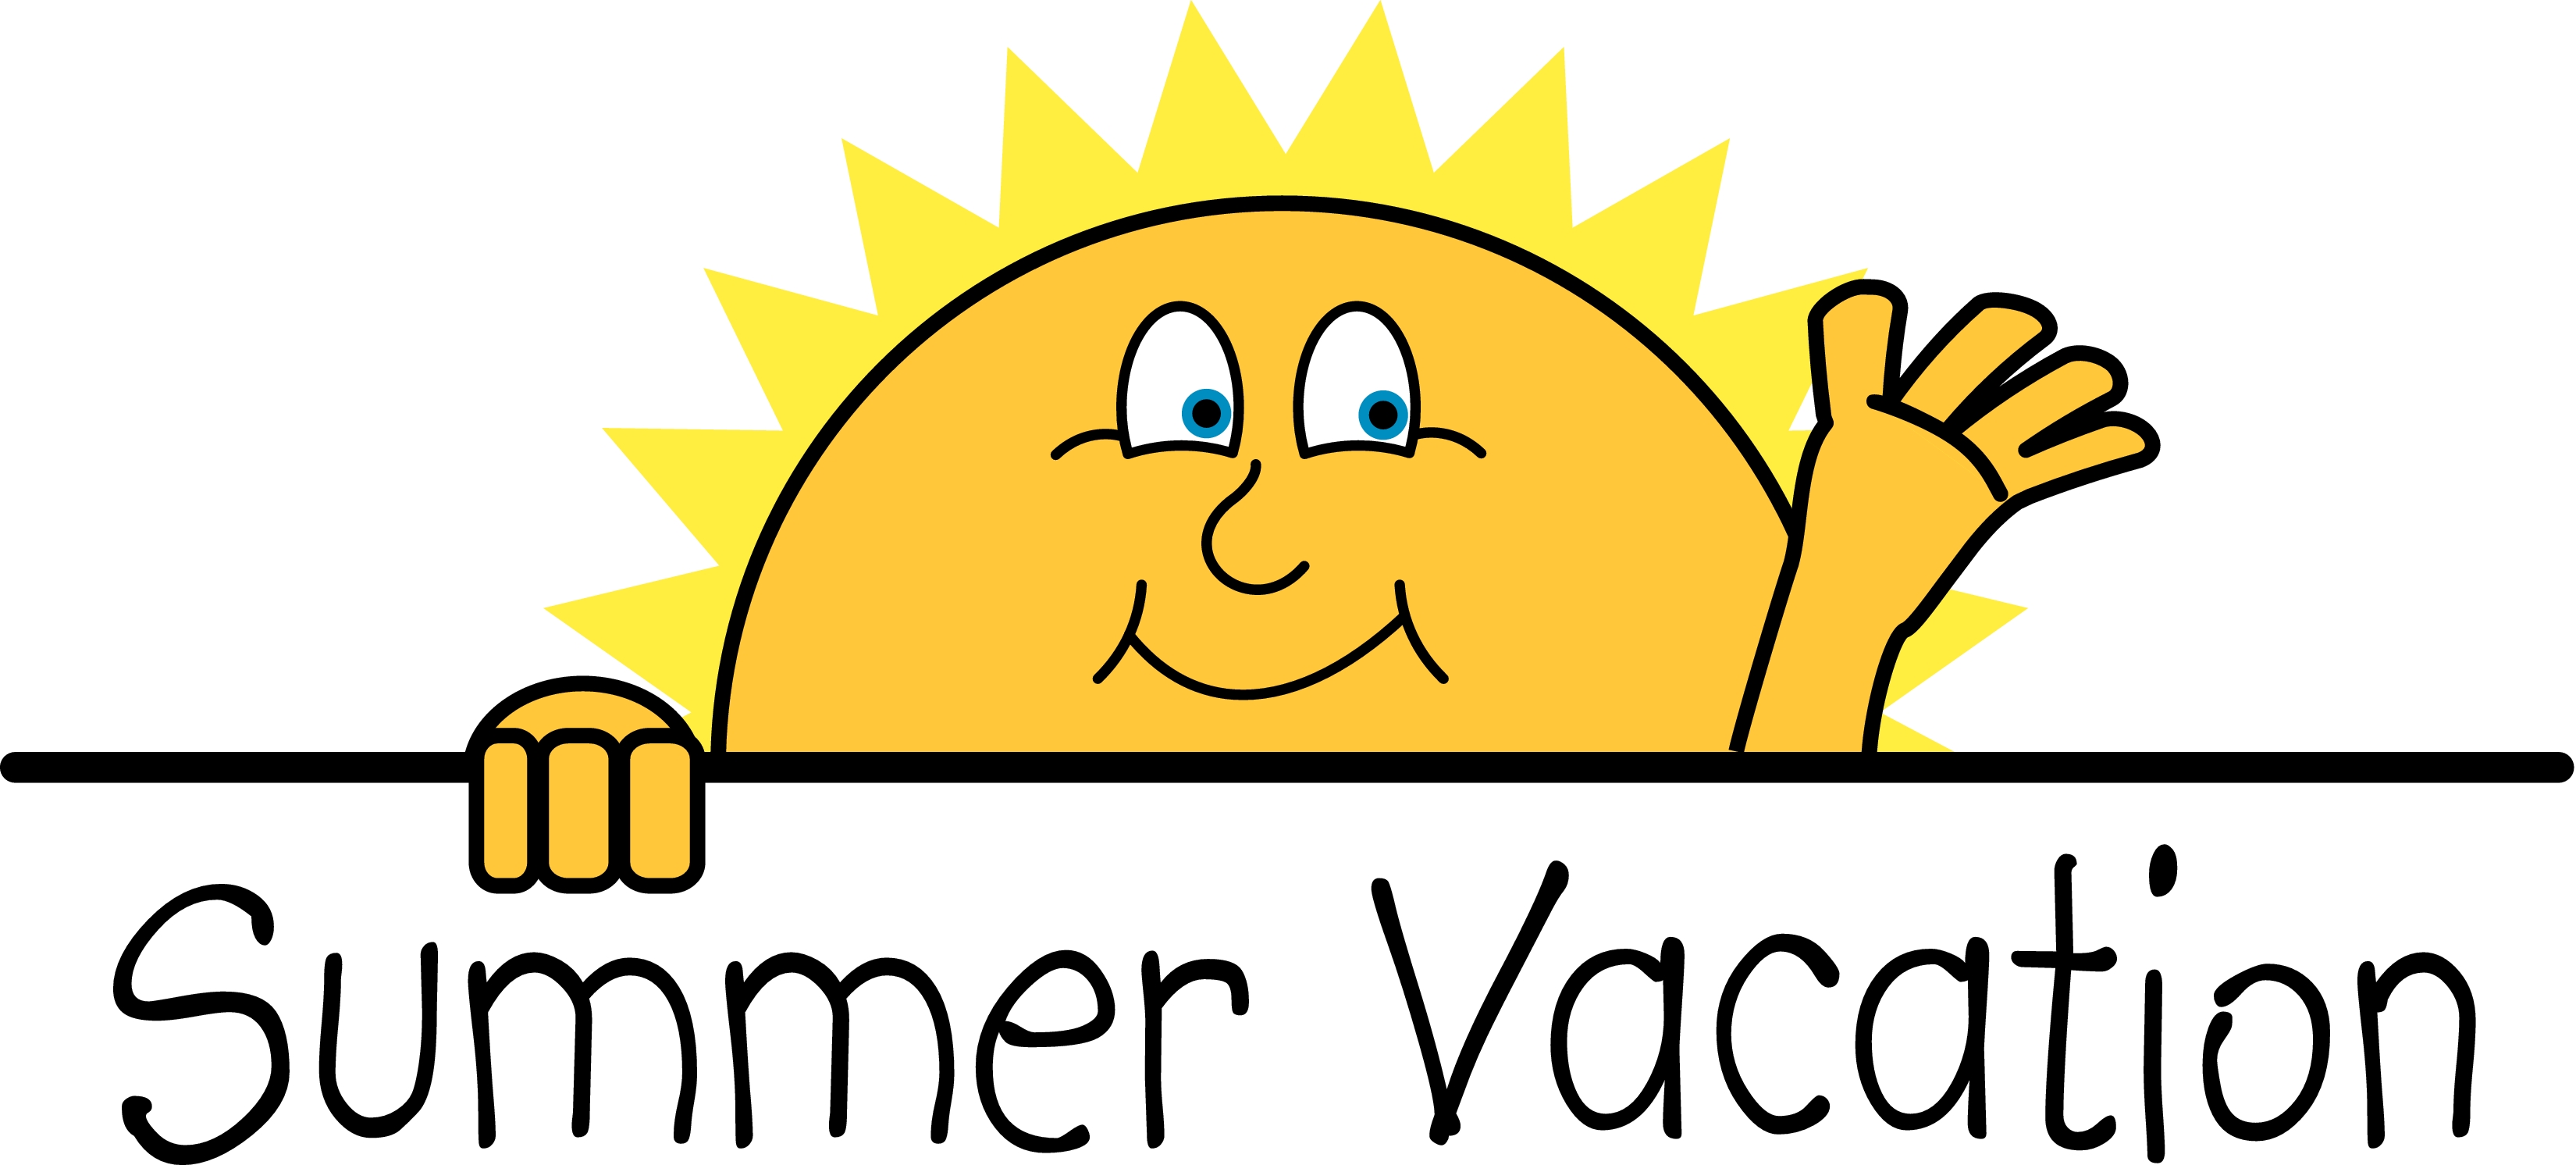 Happy summer vacation clipart clipartfest - Cliparting.com